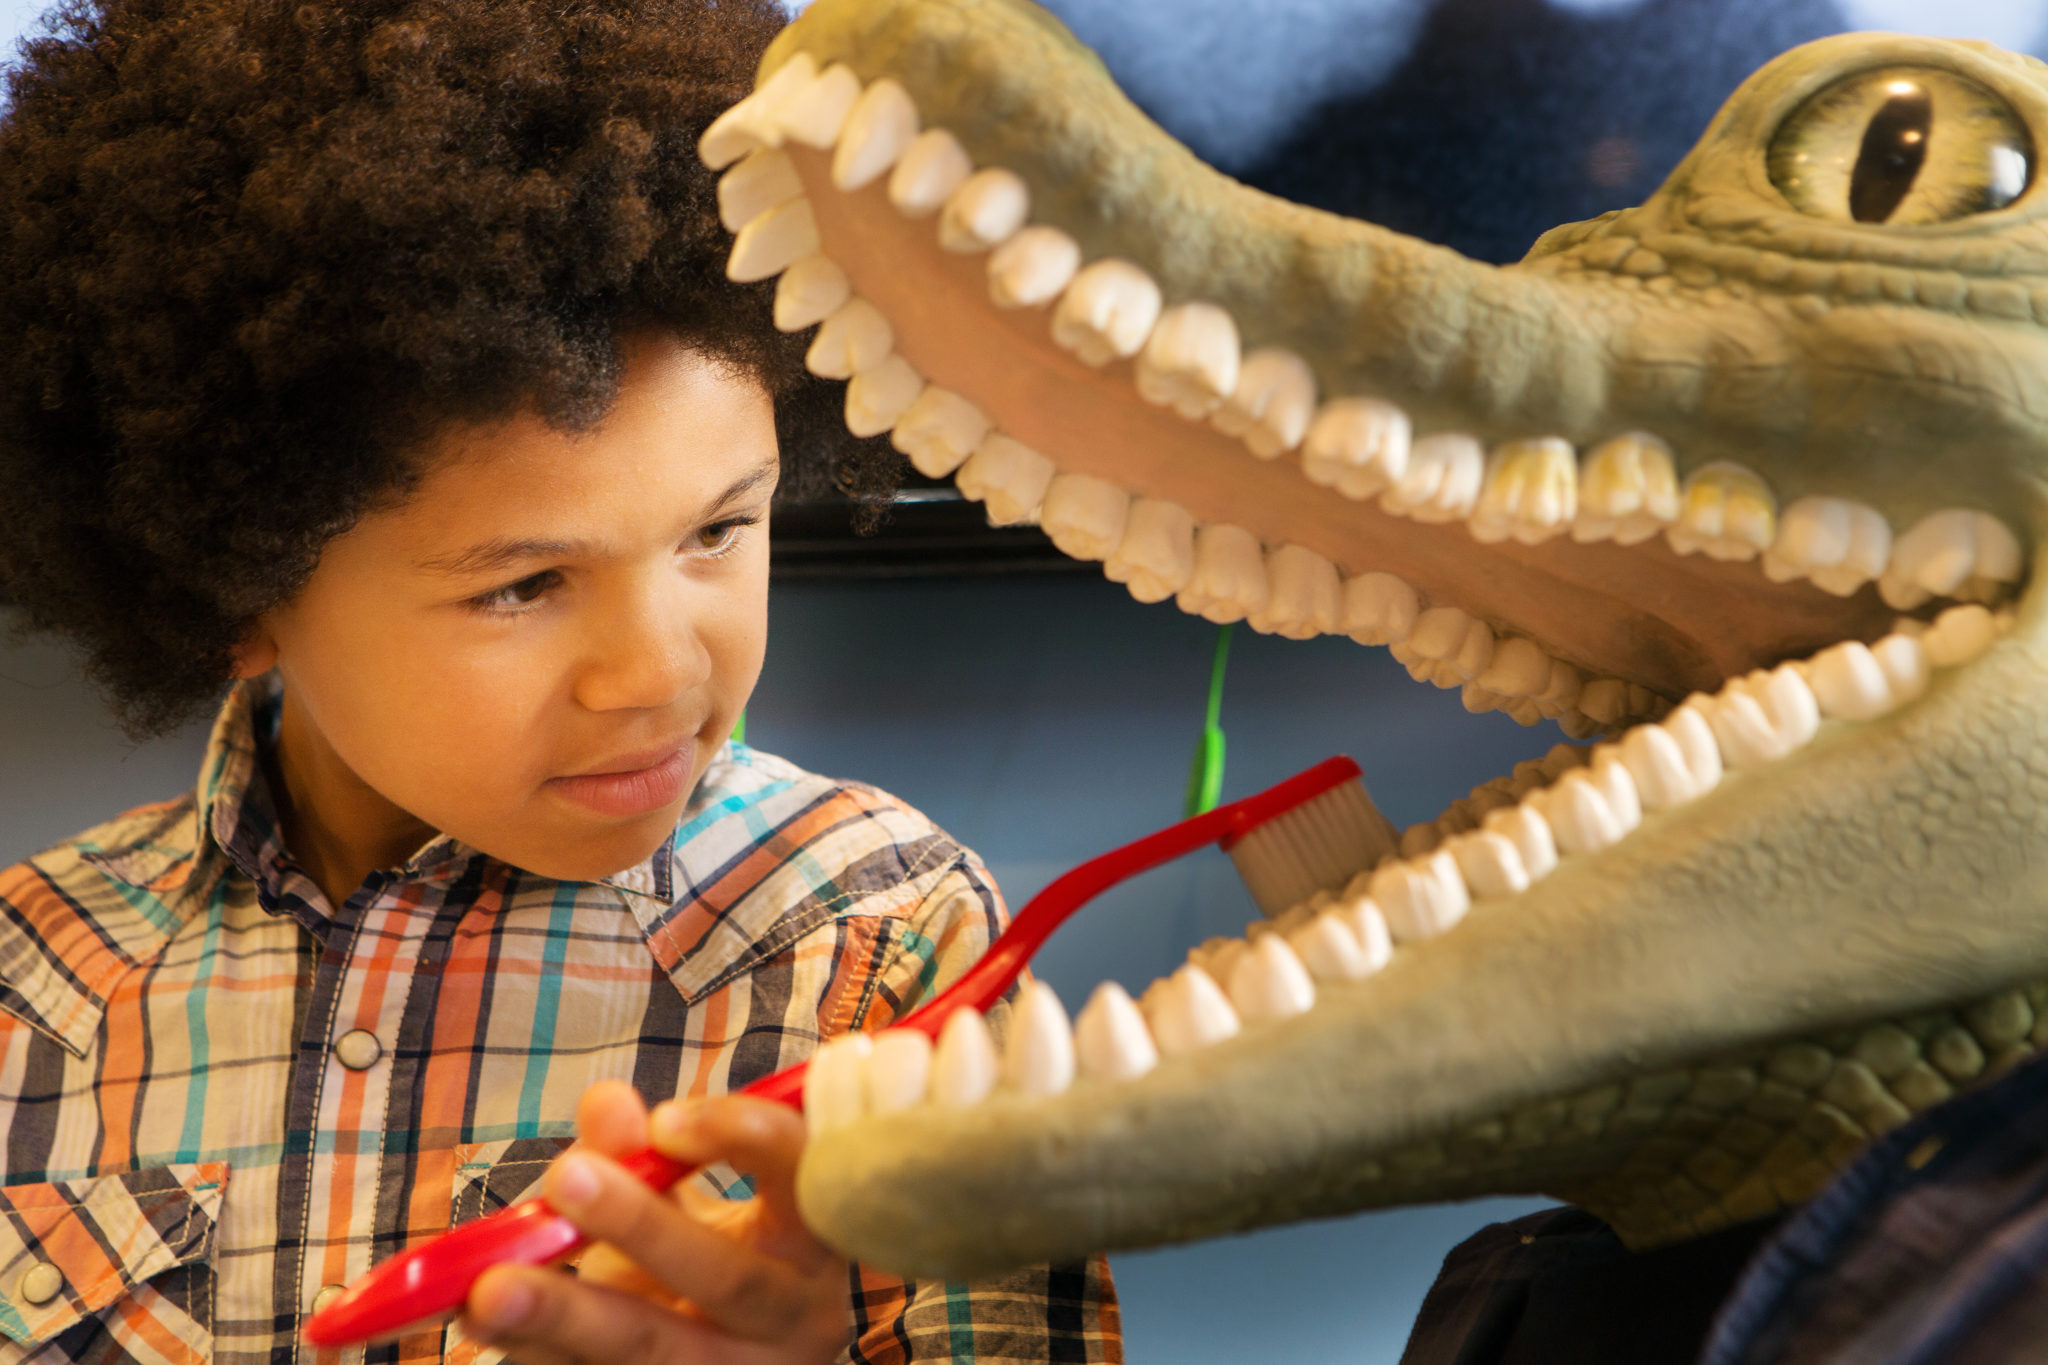 young child brushing the teeth of a plastic resin alligator to learn about dentistry